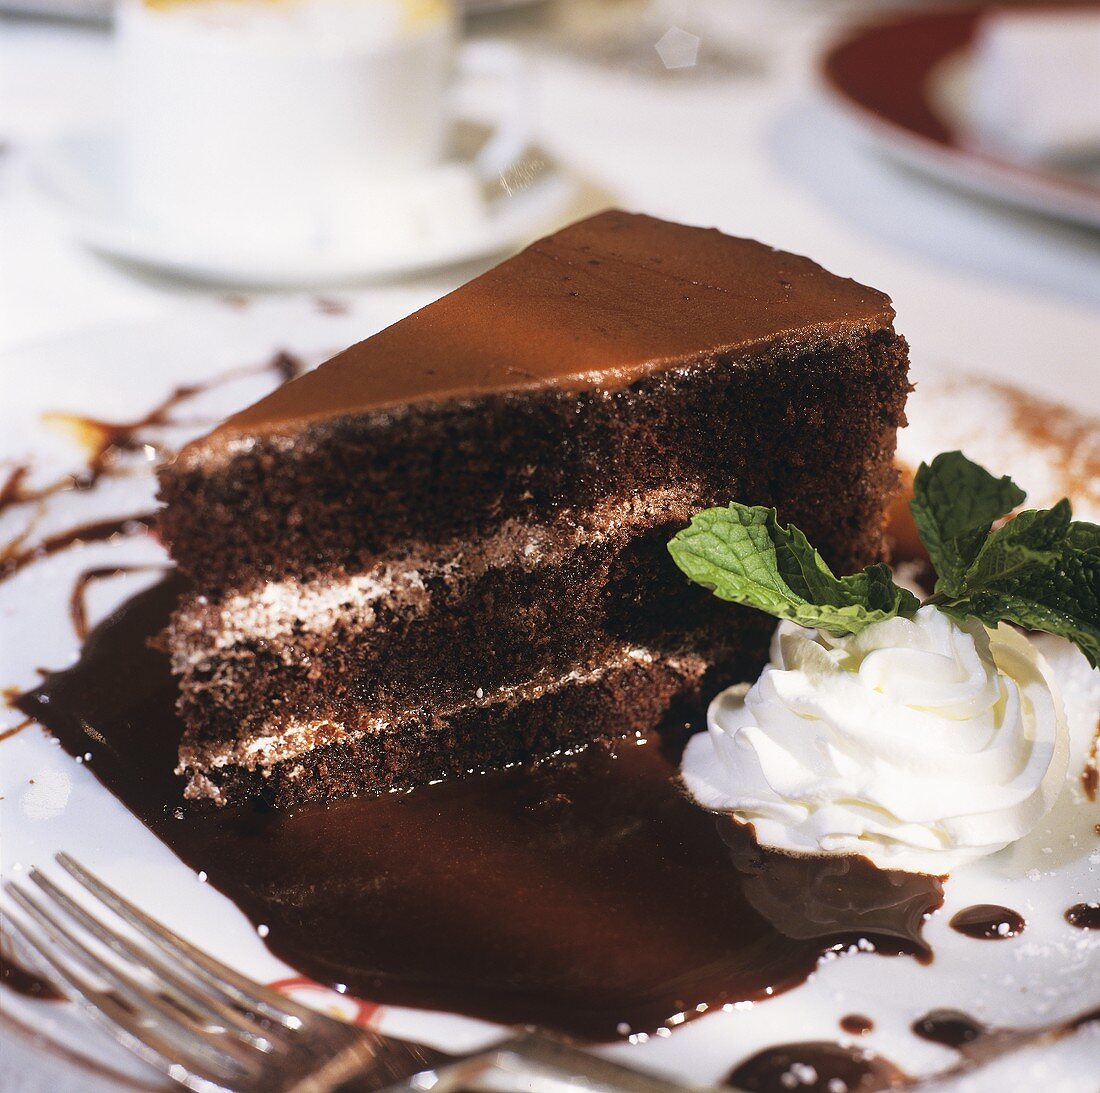 A Slice of Triple Layer Chocolate Cake